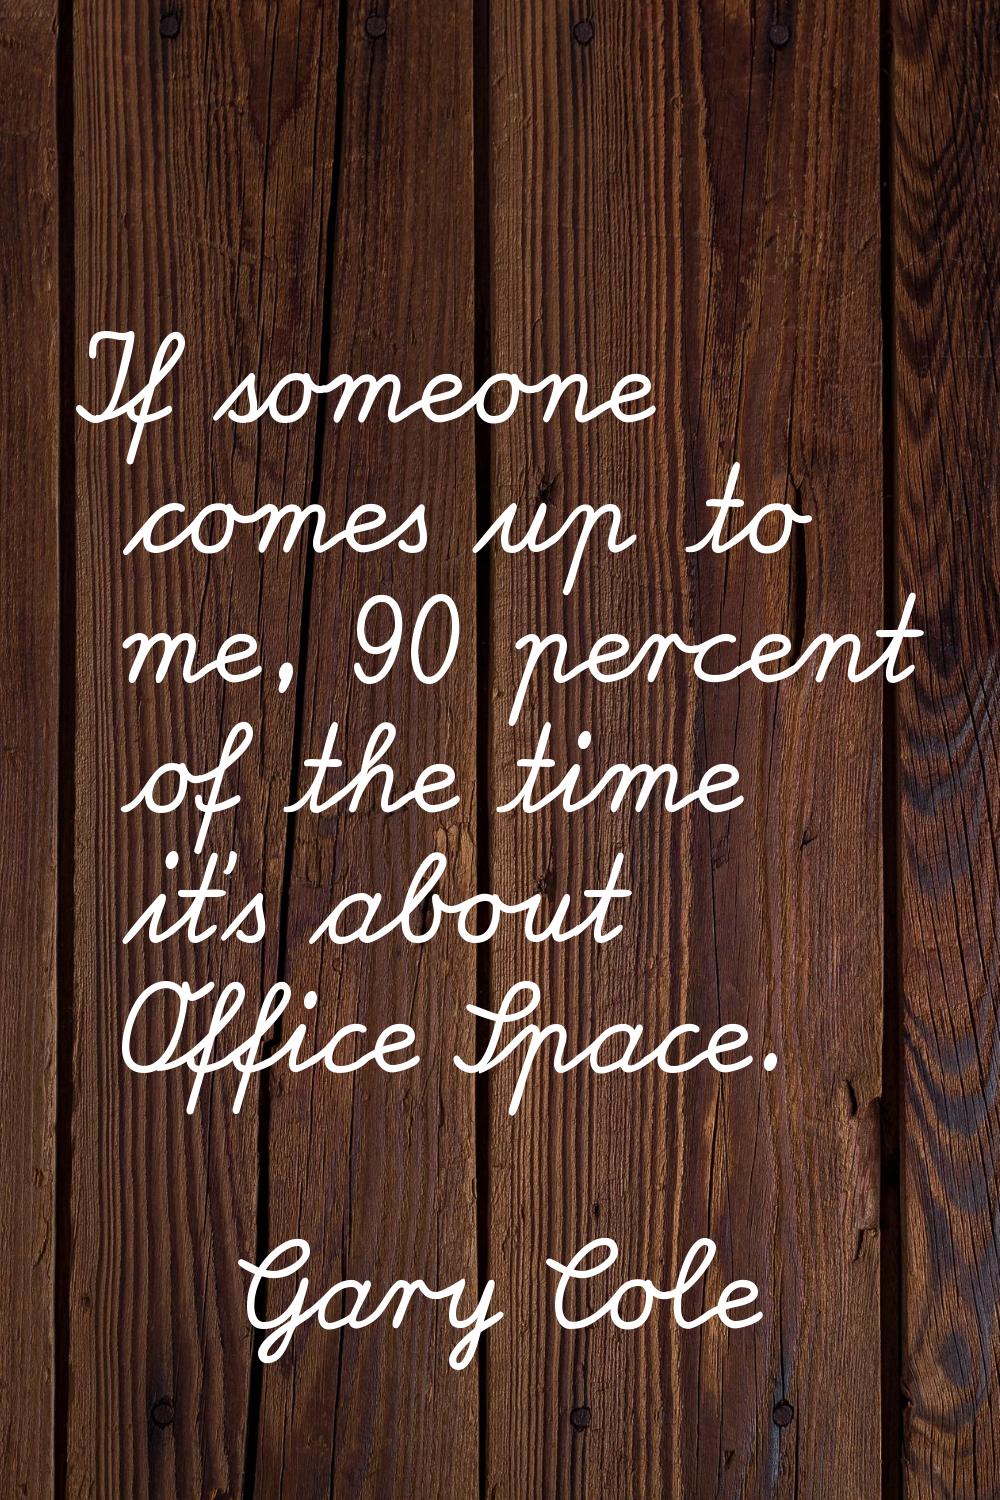 If someone comes up to me, 90 percent of the time it's about Office Space.